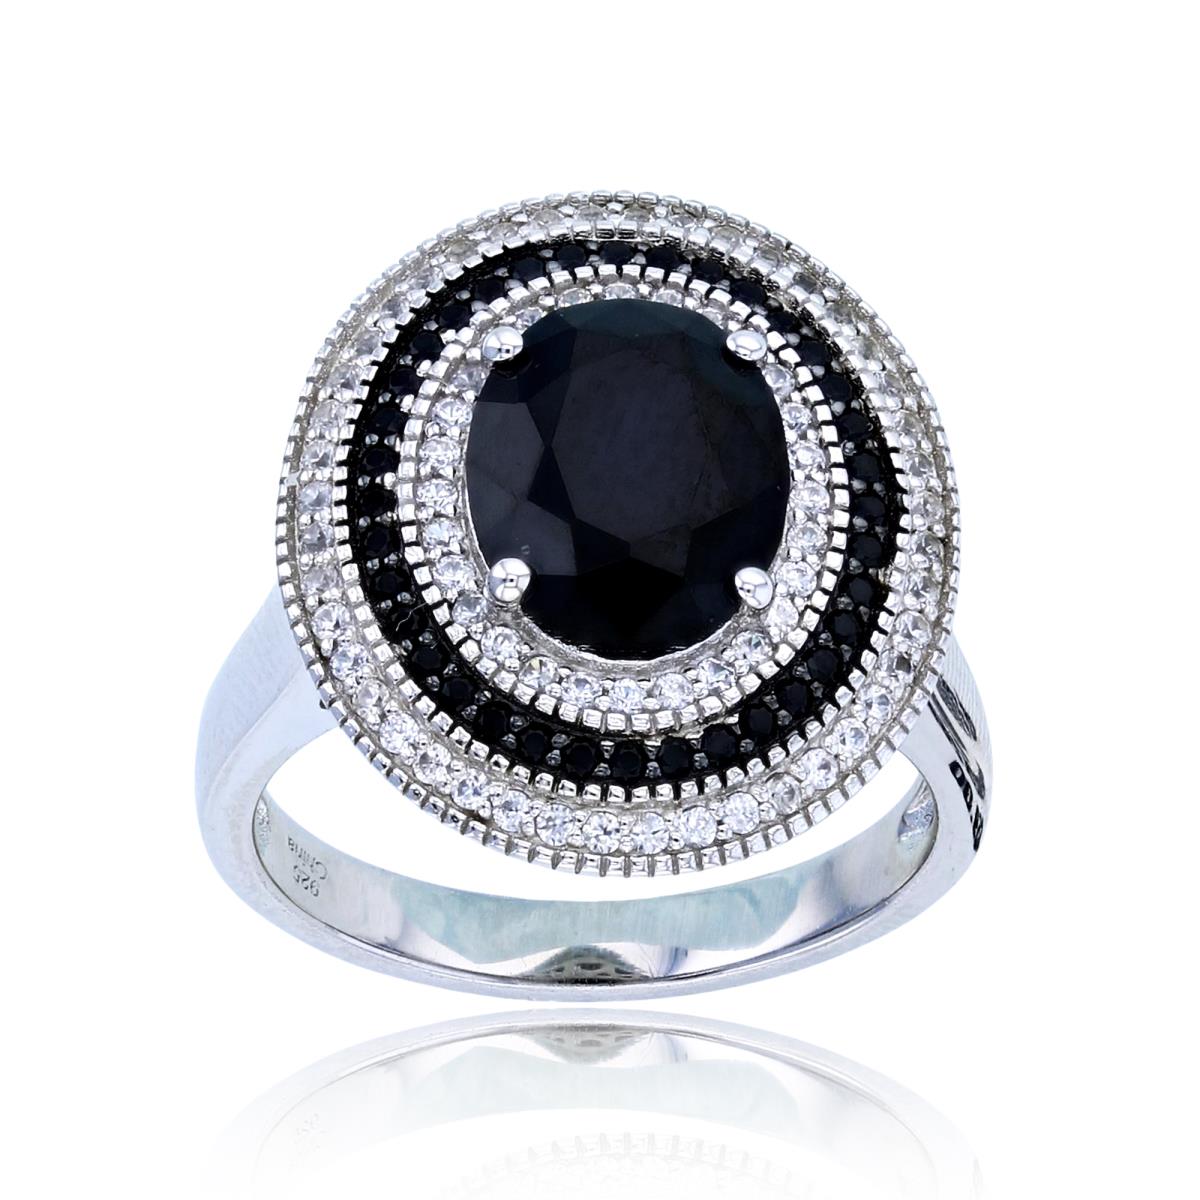 Sterling Silver Two-Tone (Blk/Wh) 10x8mm Ov Black Spinel & Rnd White Zircon / Black Spinel Triple Halo Ring